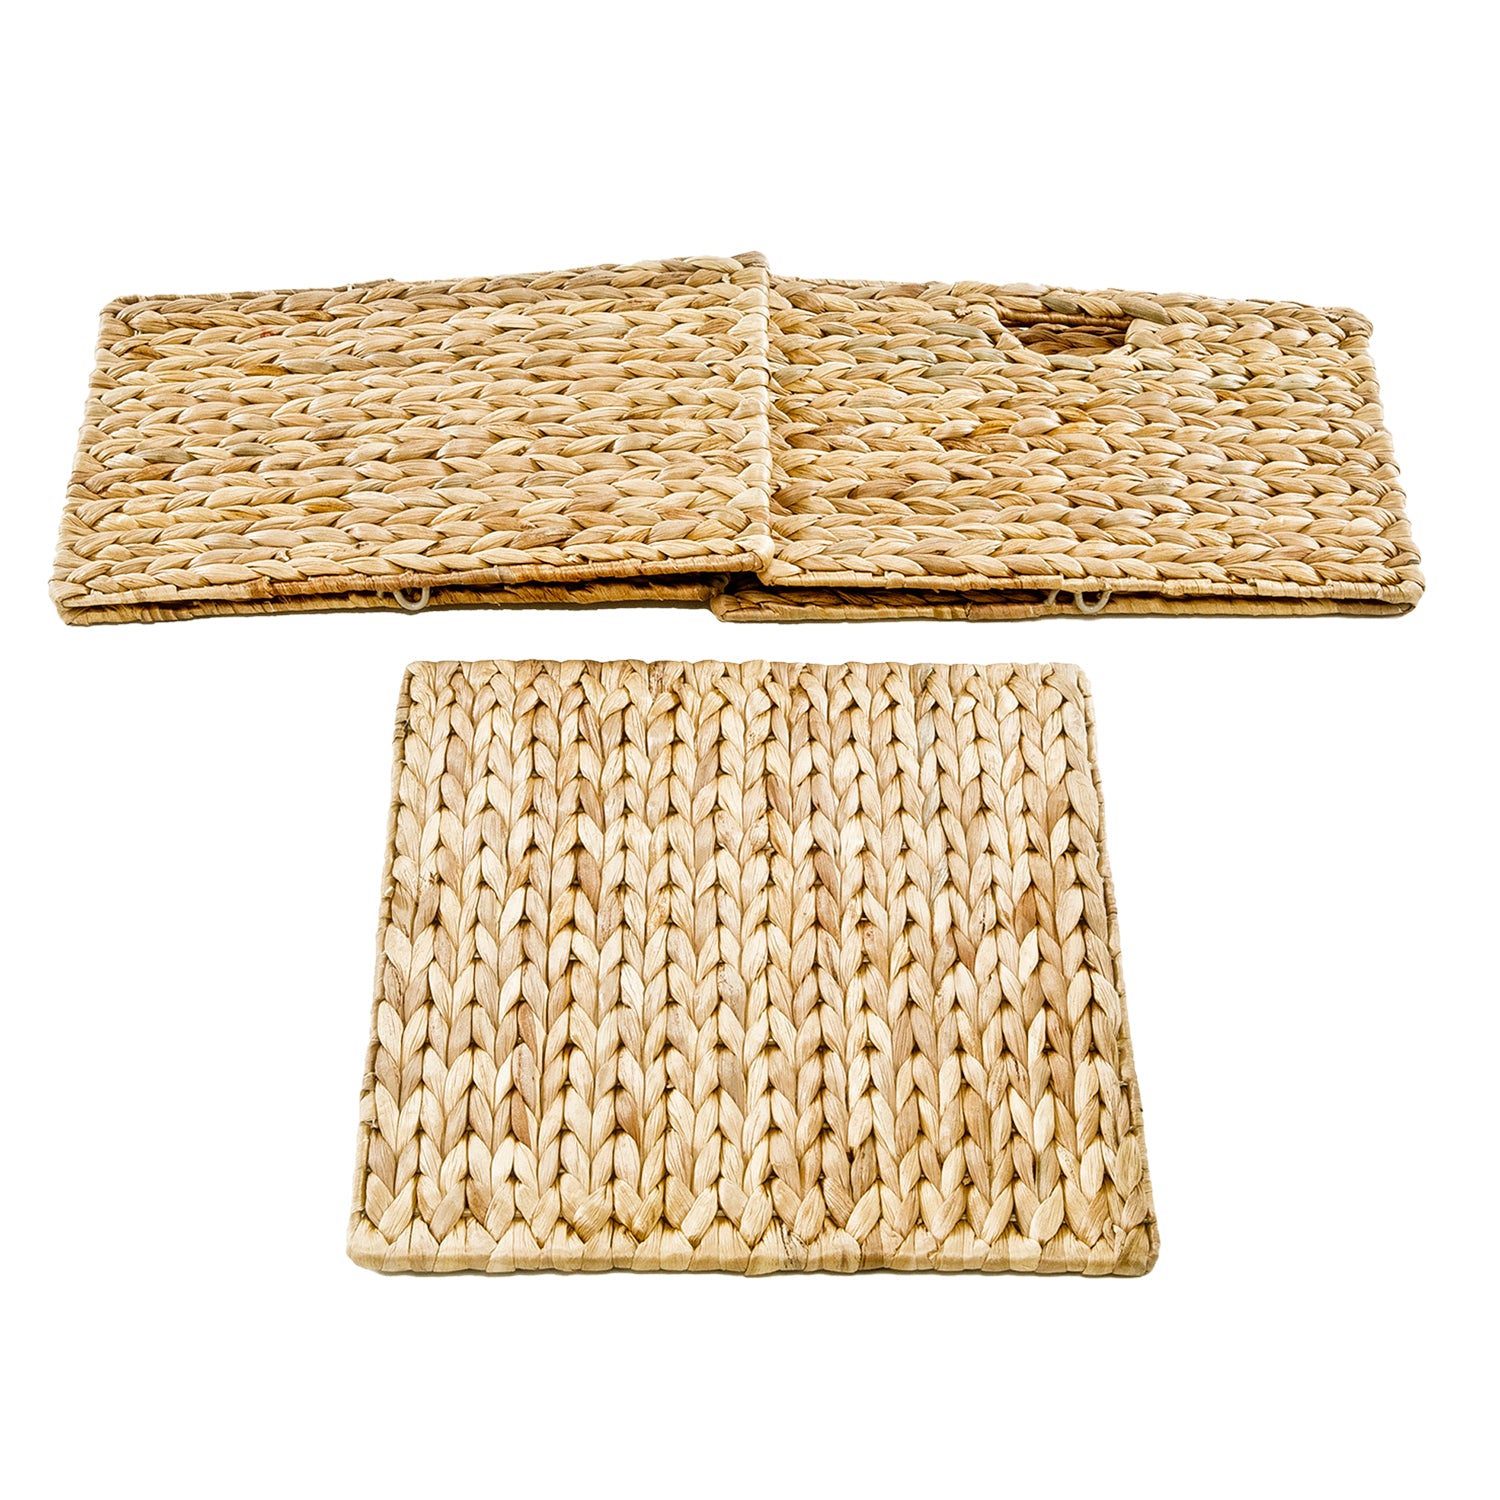 Seville Classics Hand-Woven Hyacinth Storage Cube Basket, Natural - Set of 2